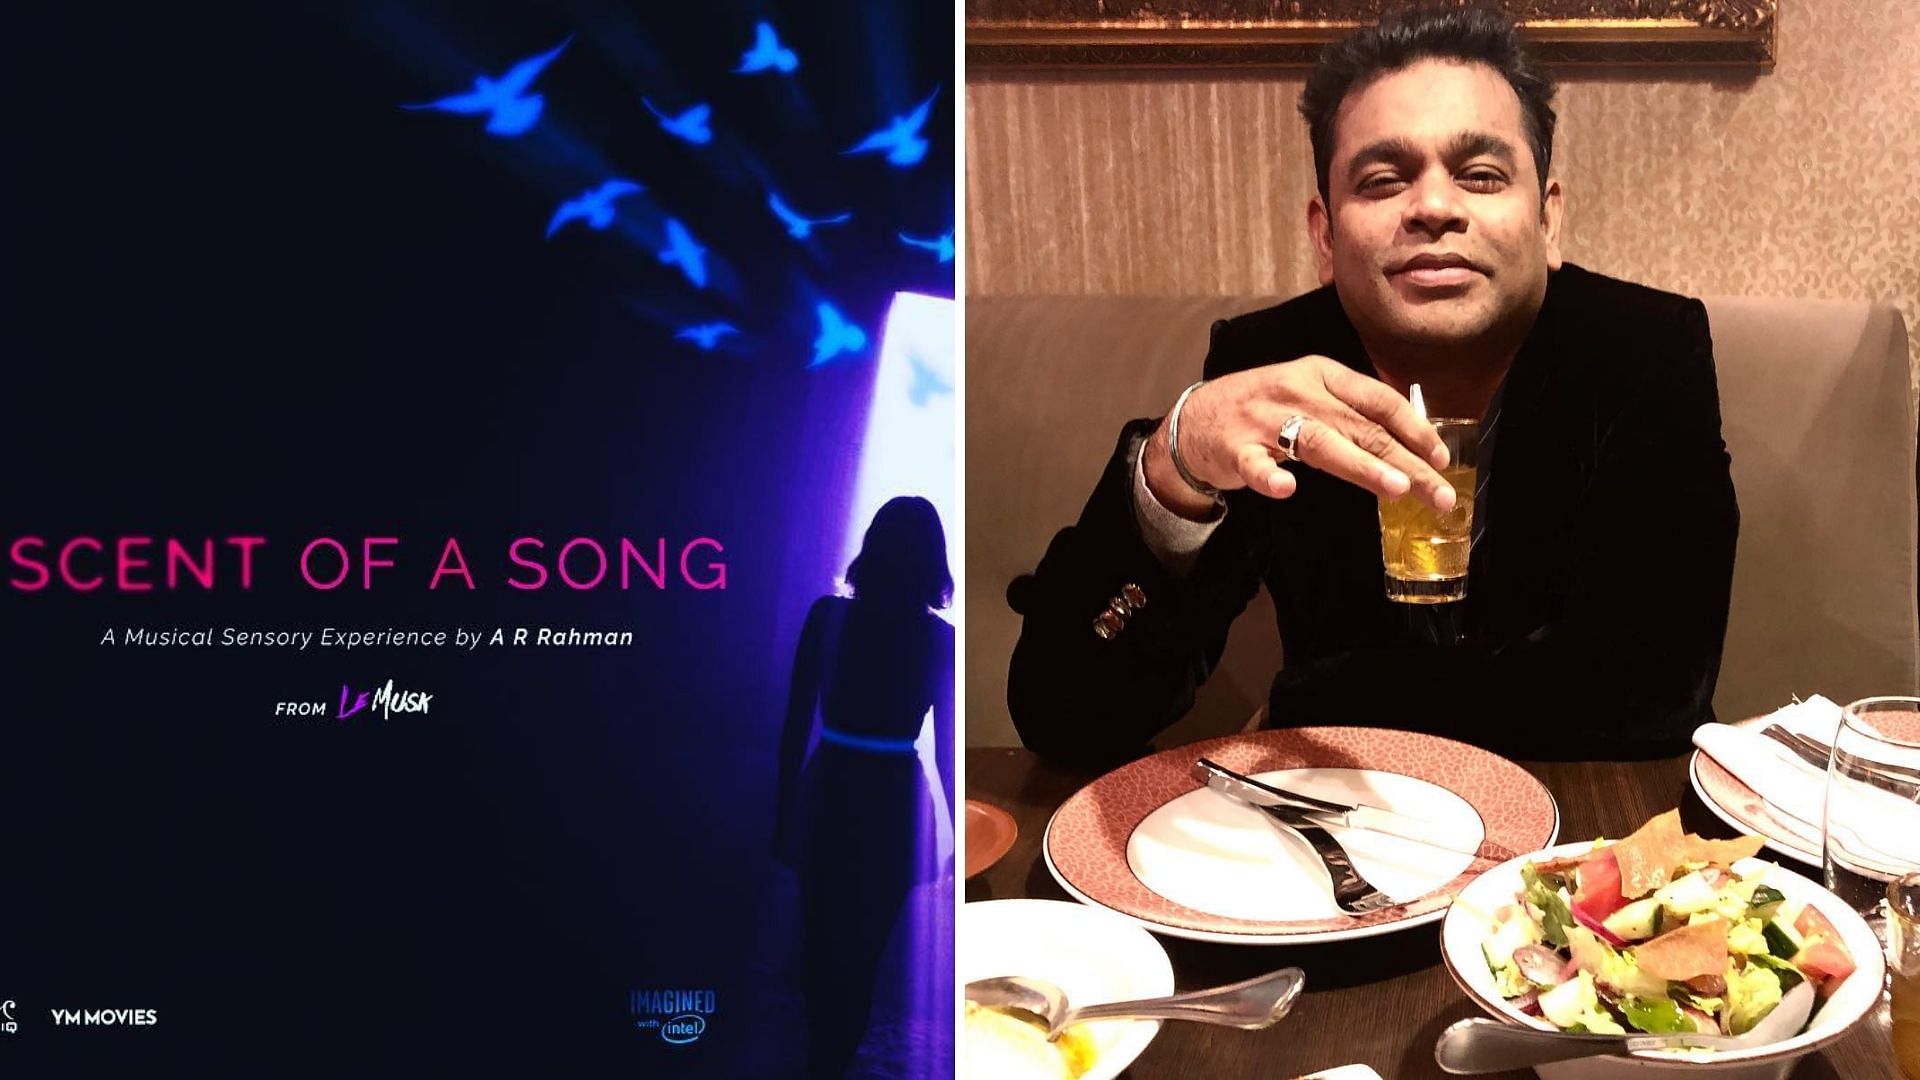 AR Rahman will present ‘Scent of a Song’ at Cannes Film Festival 2019.